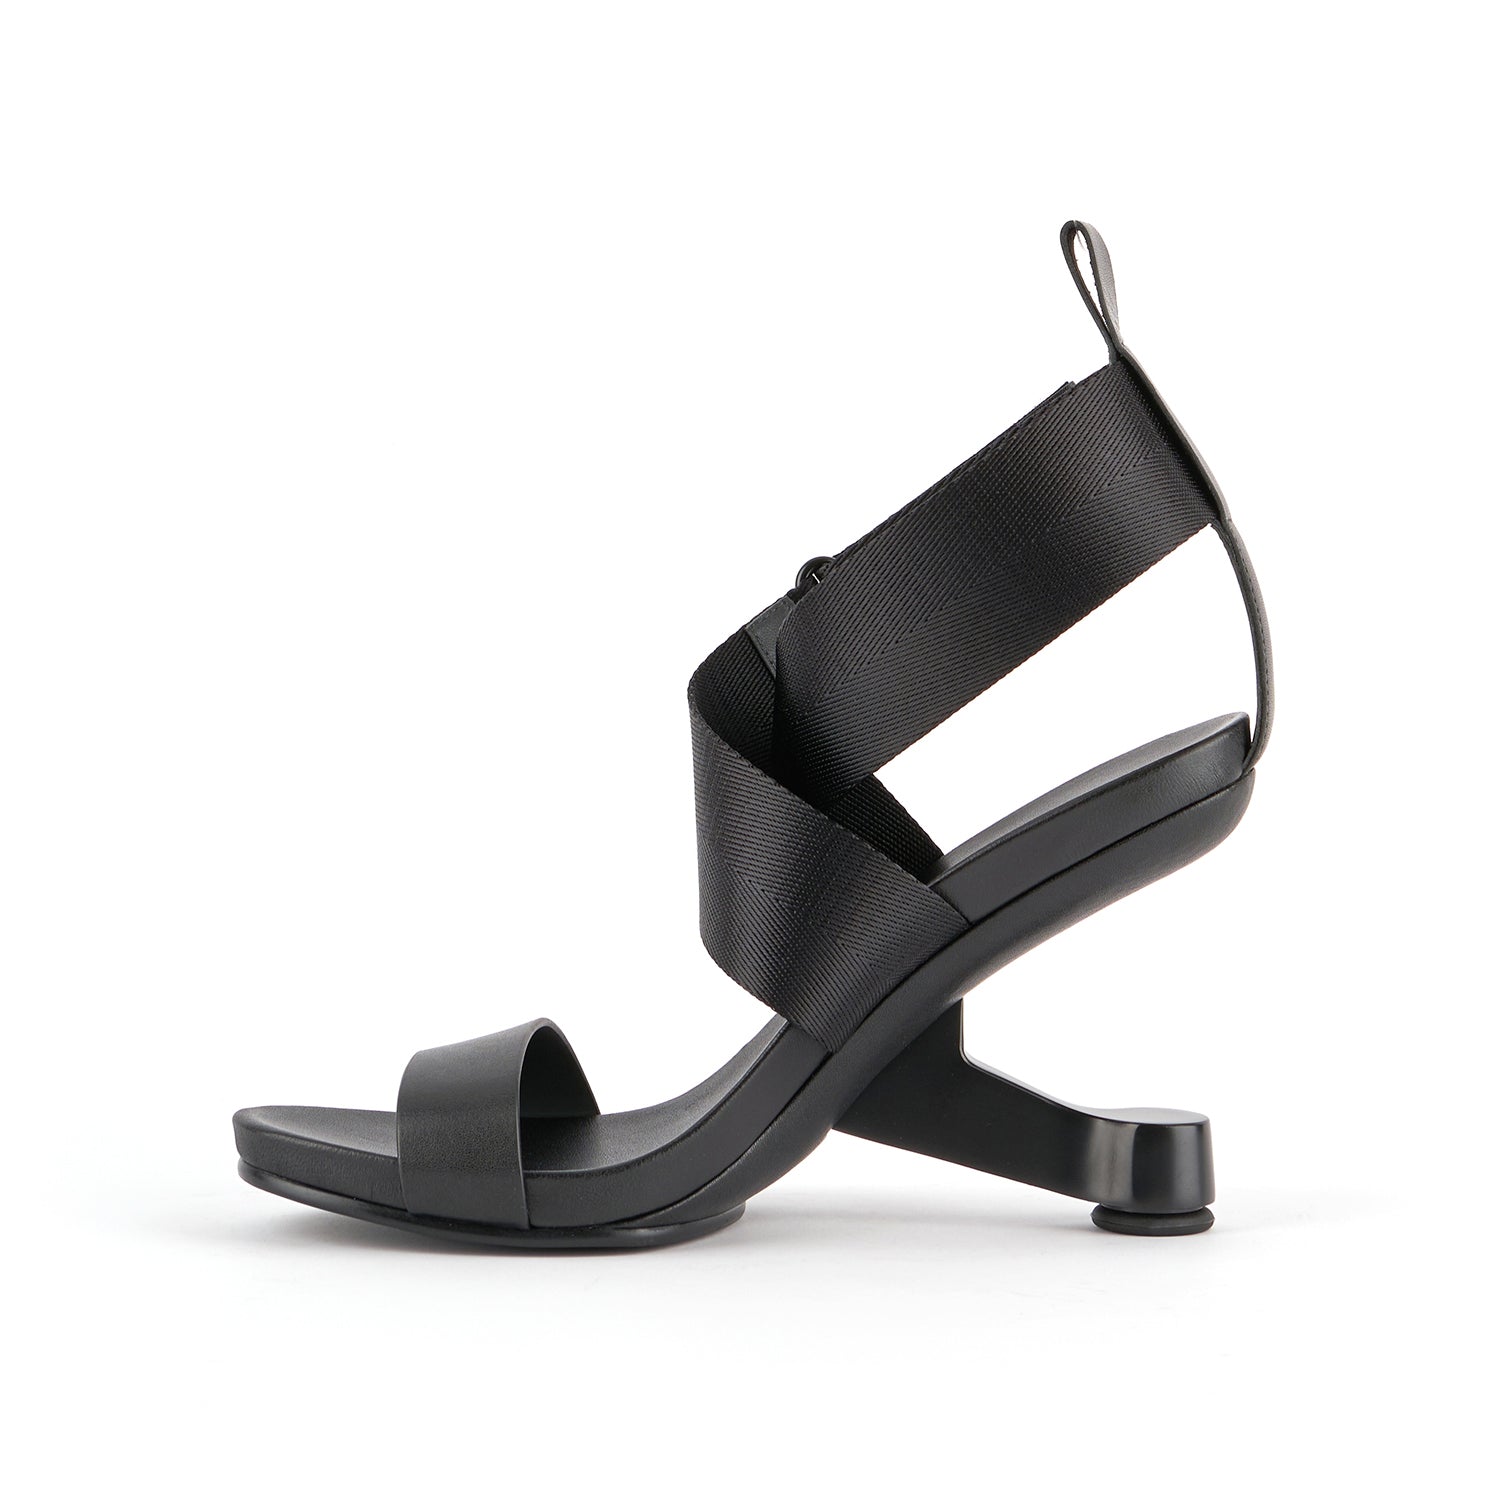 inner side view of the united nude eamz IX Black high heeled sandal.